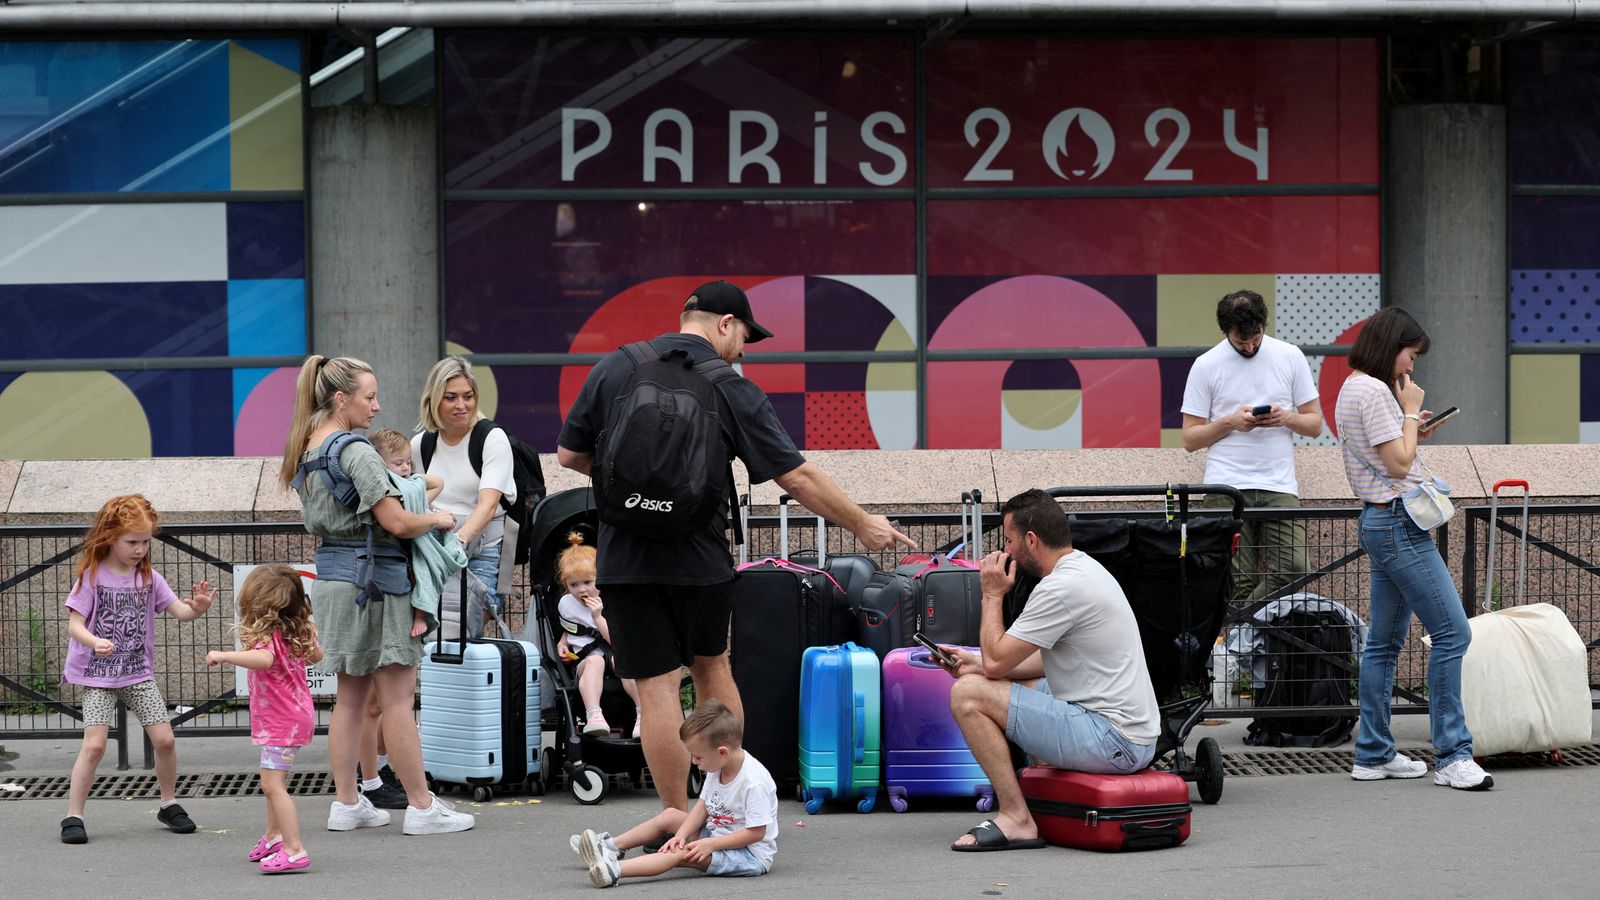 Who would cause such chaos on France's rail network before the Olympics, and avoid claiming publicity?